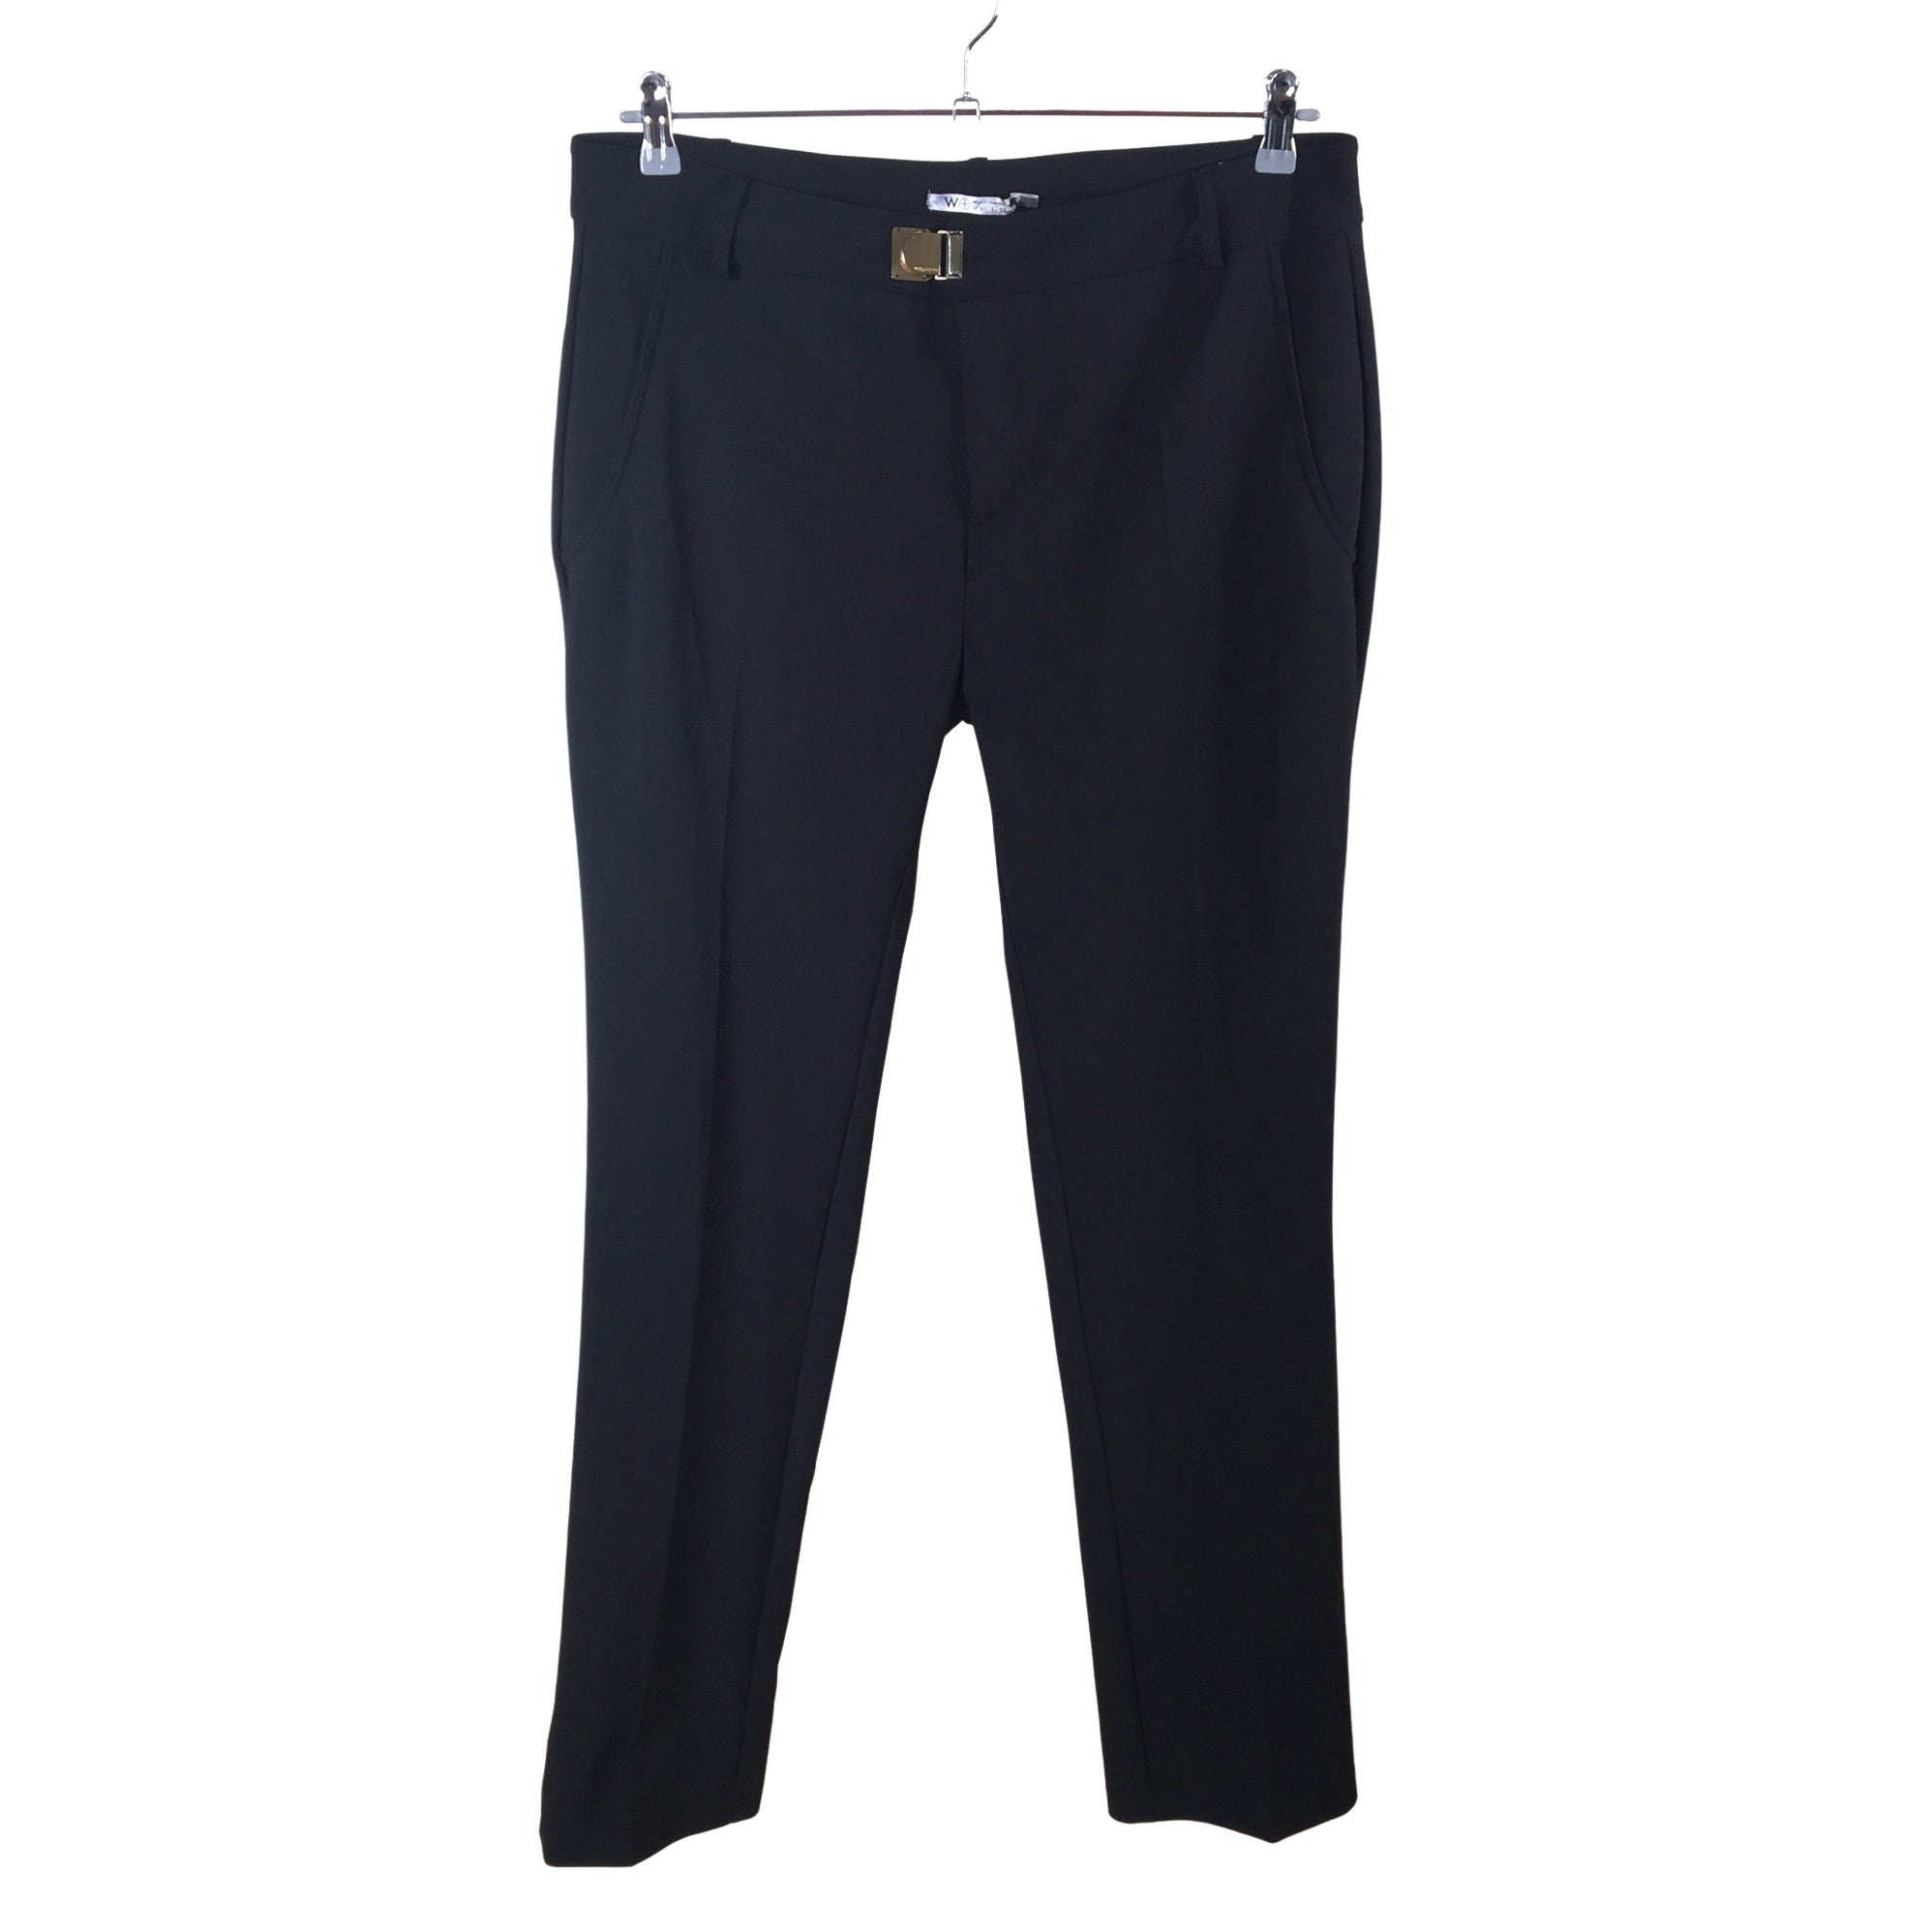 InWear EmanIW Trousers Black  Shop Black EmanIW Trousers from size 3246  here